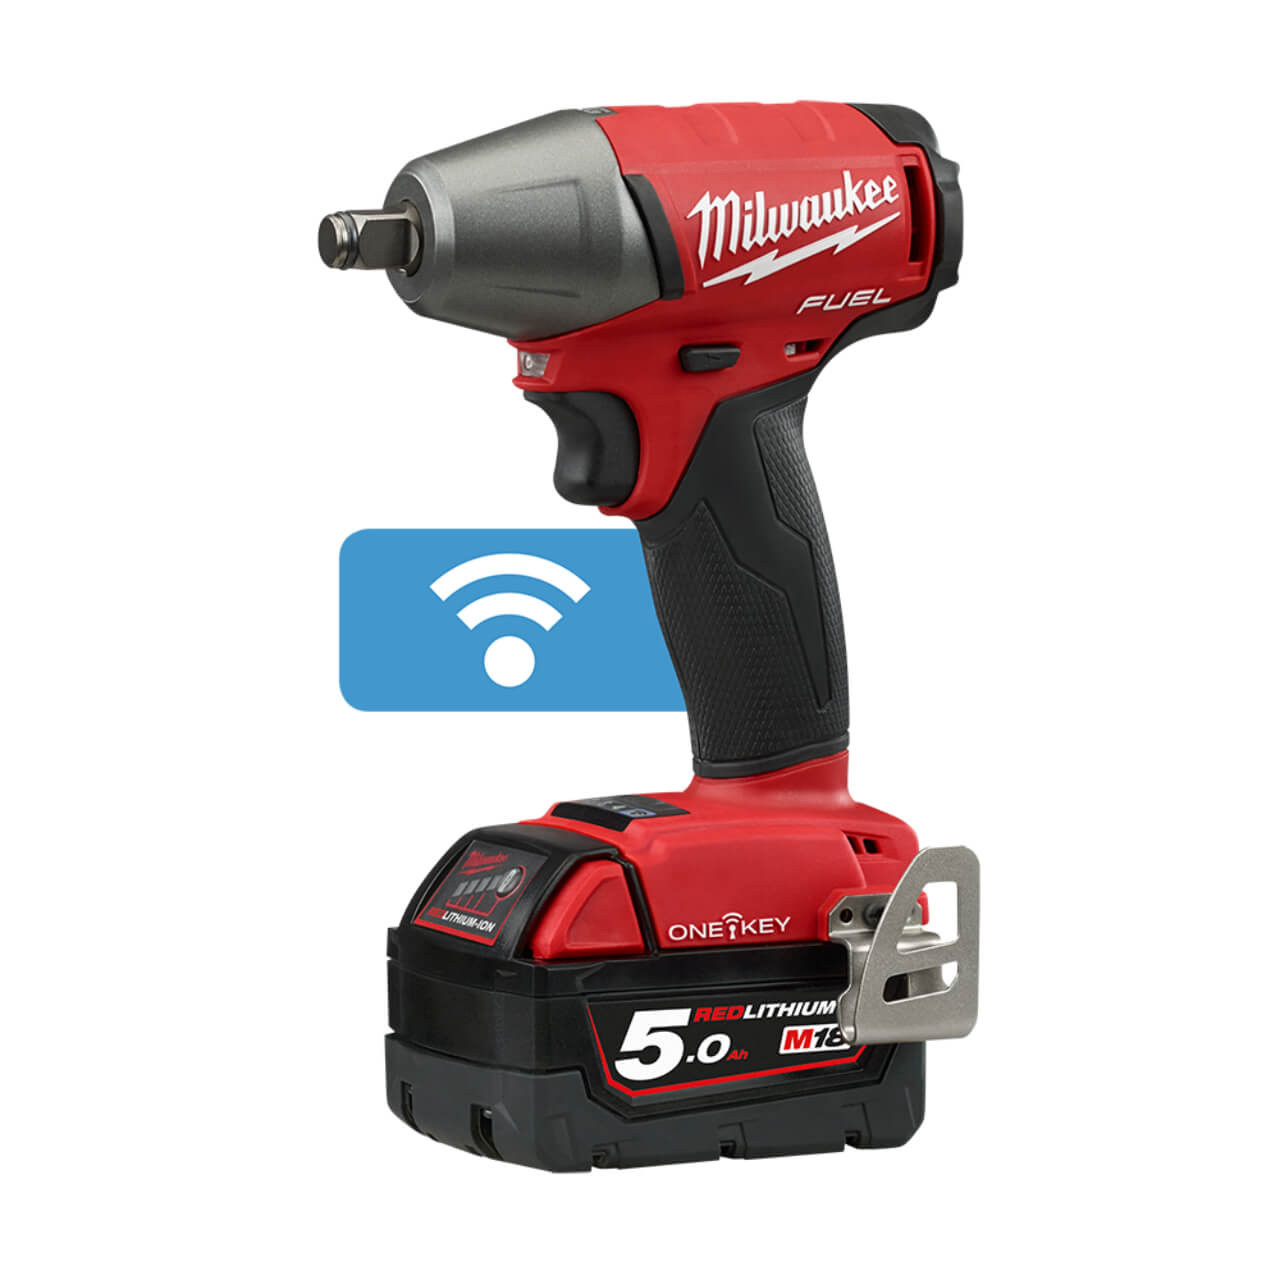 Milwaukee M18 Fuel One-Key Cordless 1/2 Impact Wrench With Friction Ring Skin Only